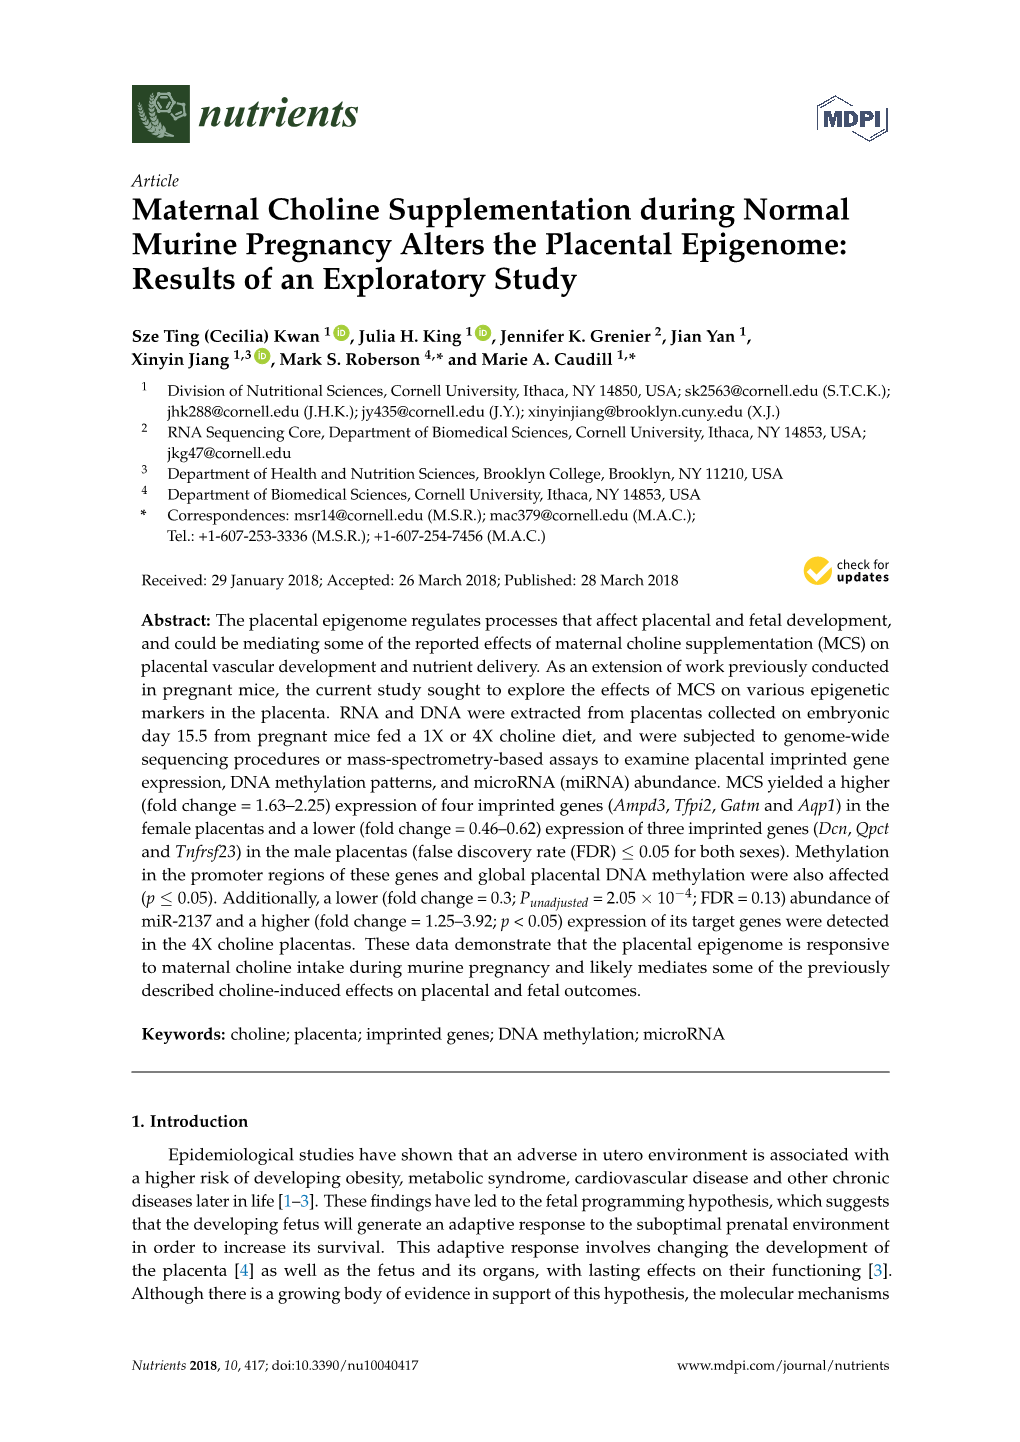 Maternal Choline Supplementation During Normal Murine Pregnancy Alters the Placental Epigenome: Results of an Exploratory Study